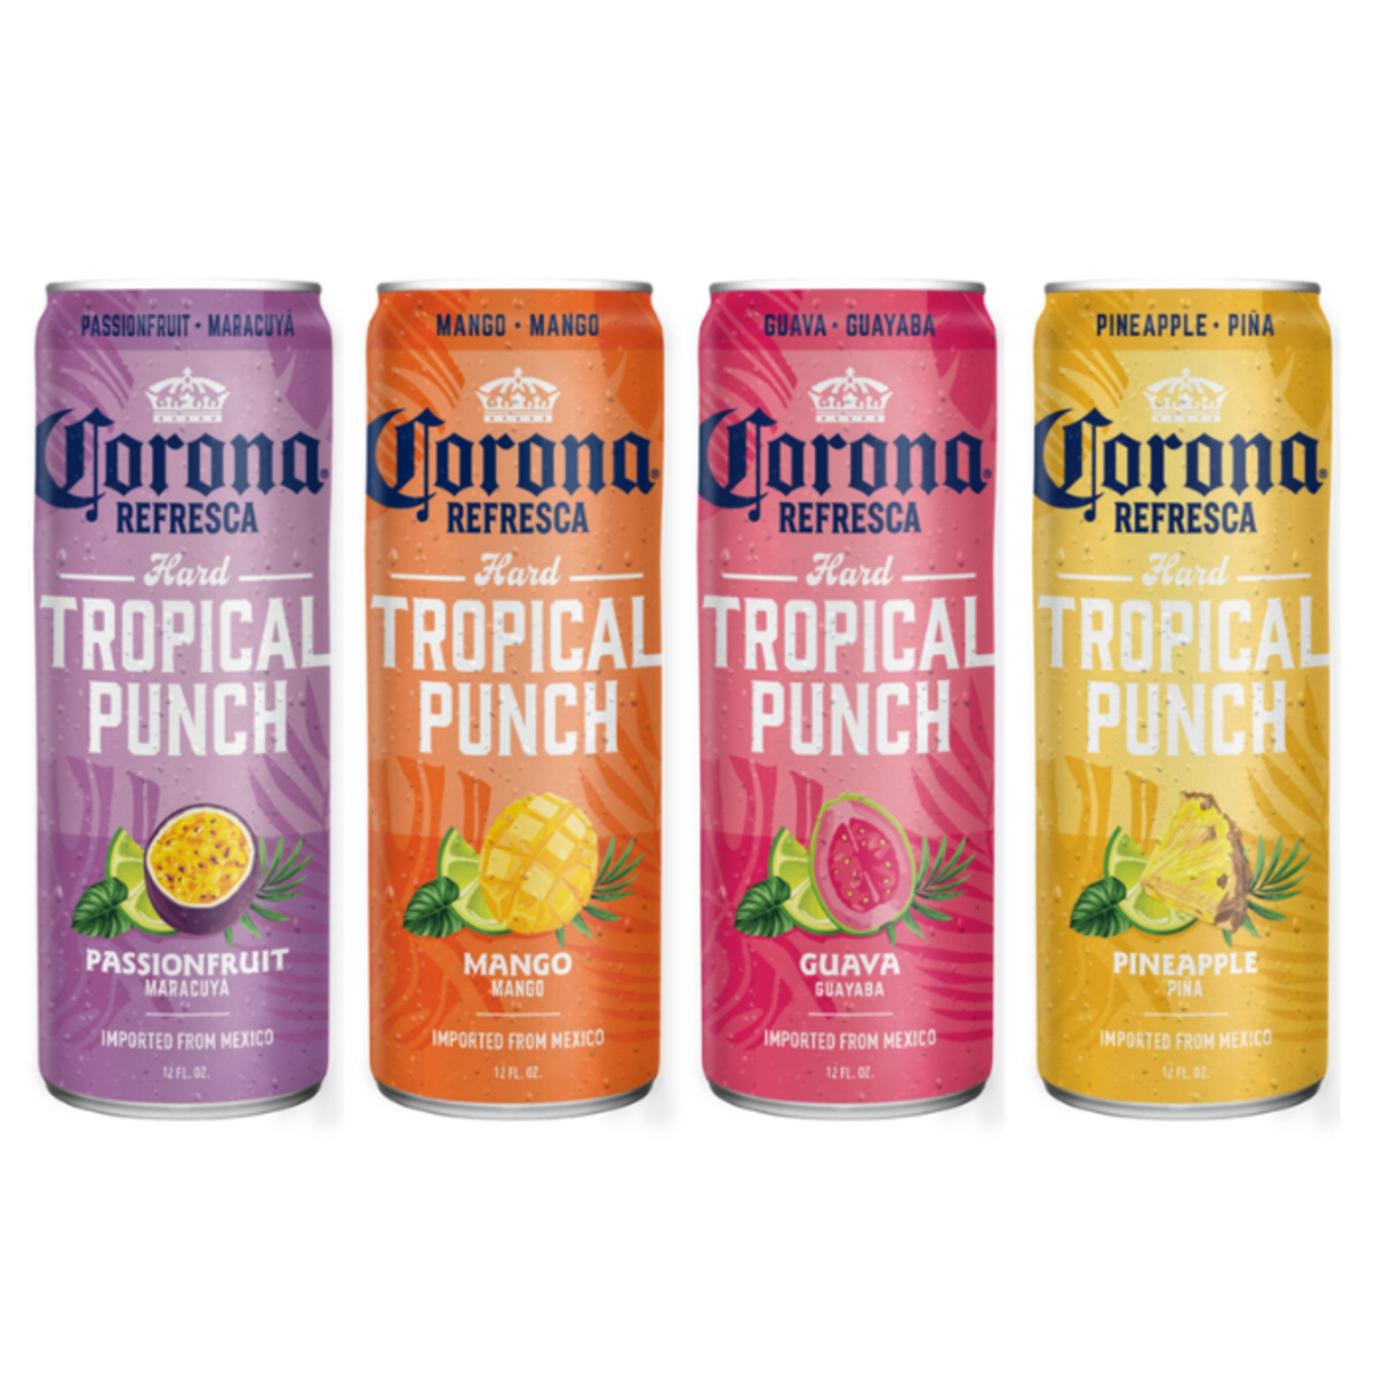 Corona Refresca Hard Tropical Punch Variety Pack 12 oz Cans, 12 pk; image 3 of 10